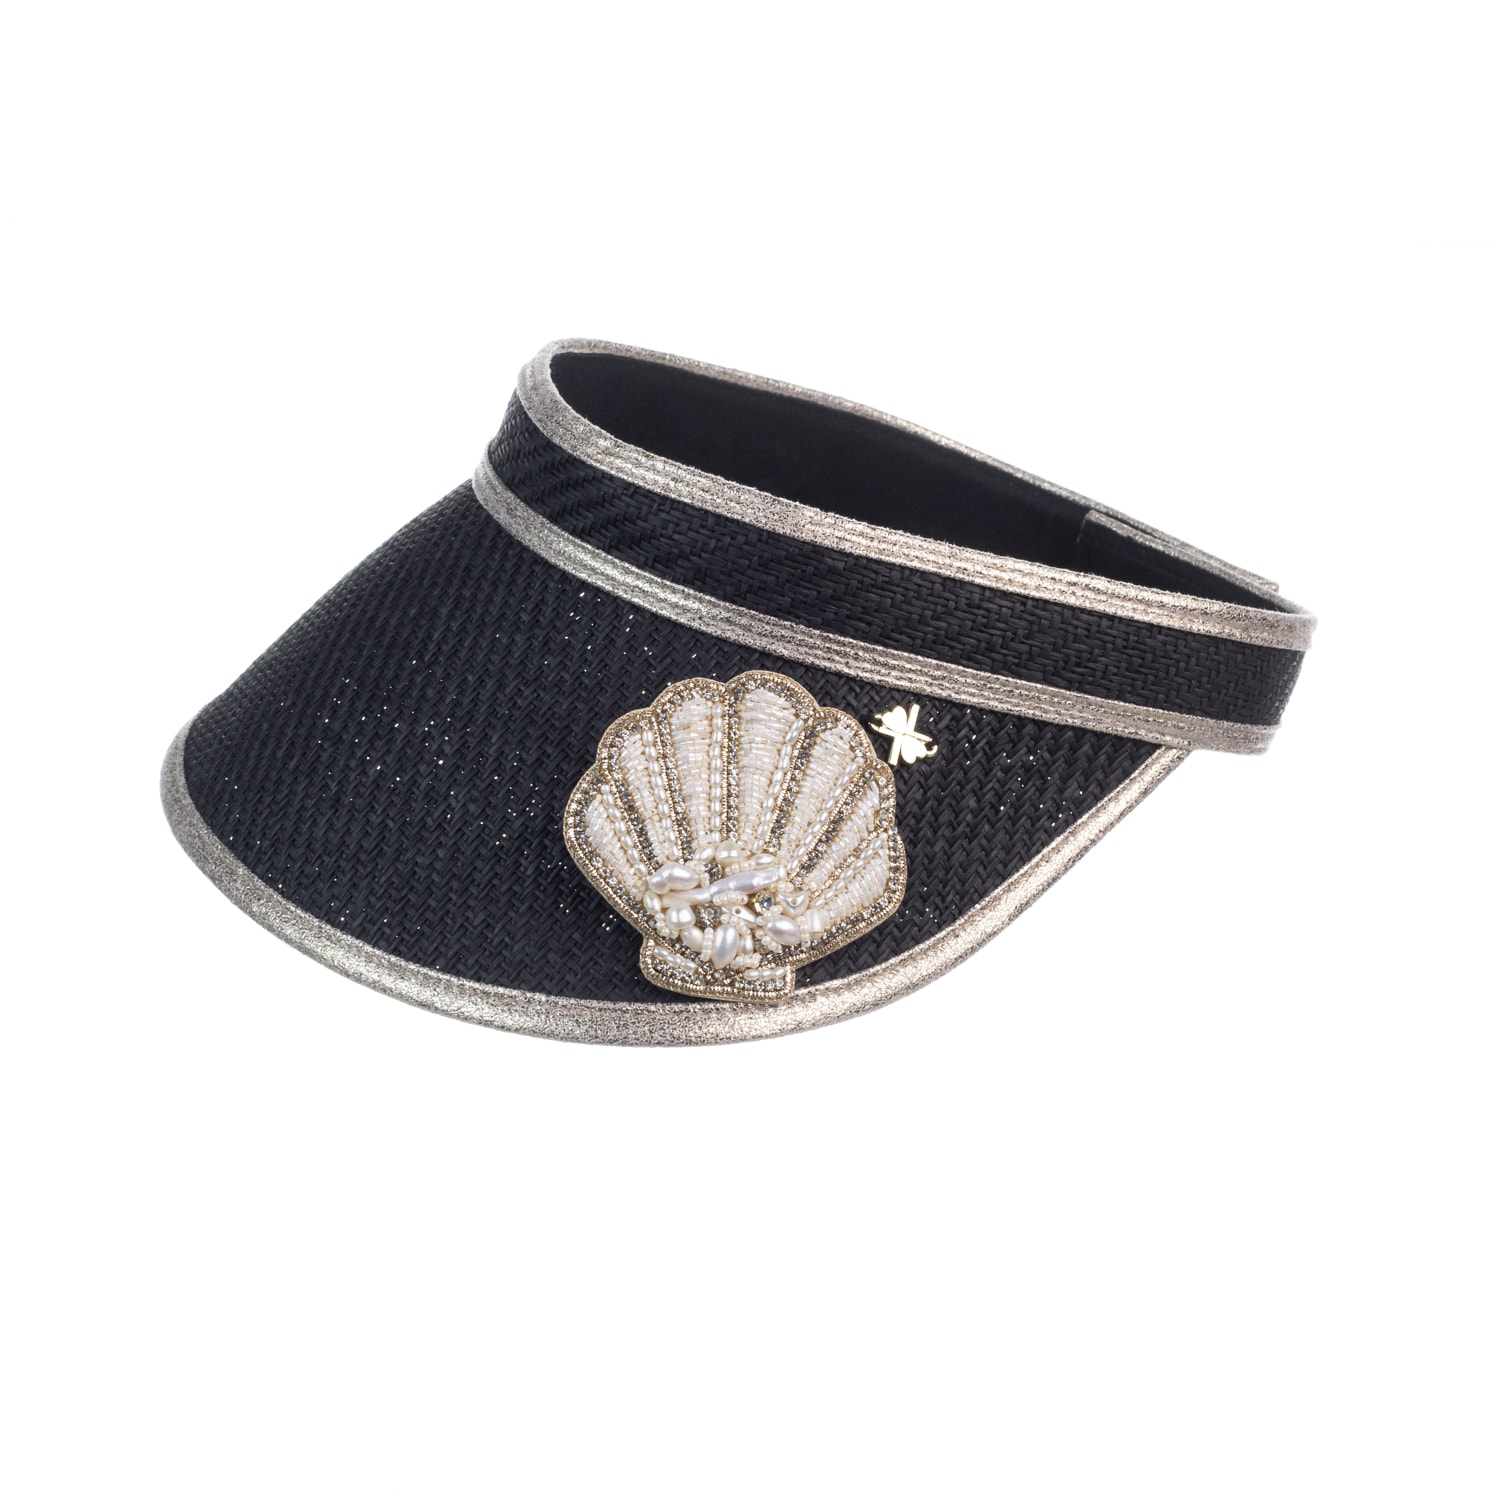 Laines London Women's Straw Woven Visor With Beaded Shell Brooch - Black